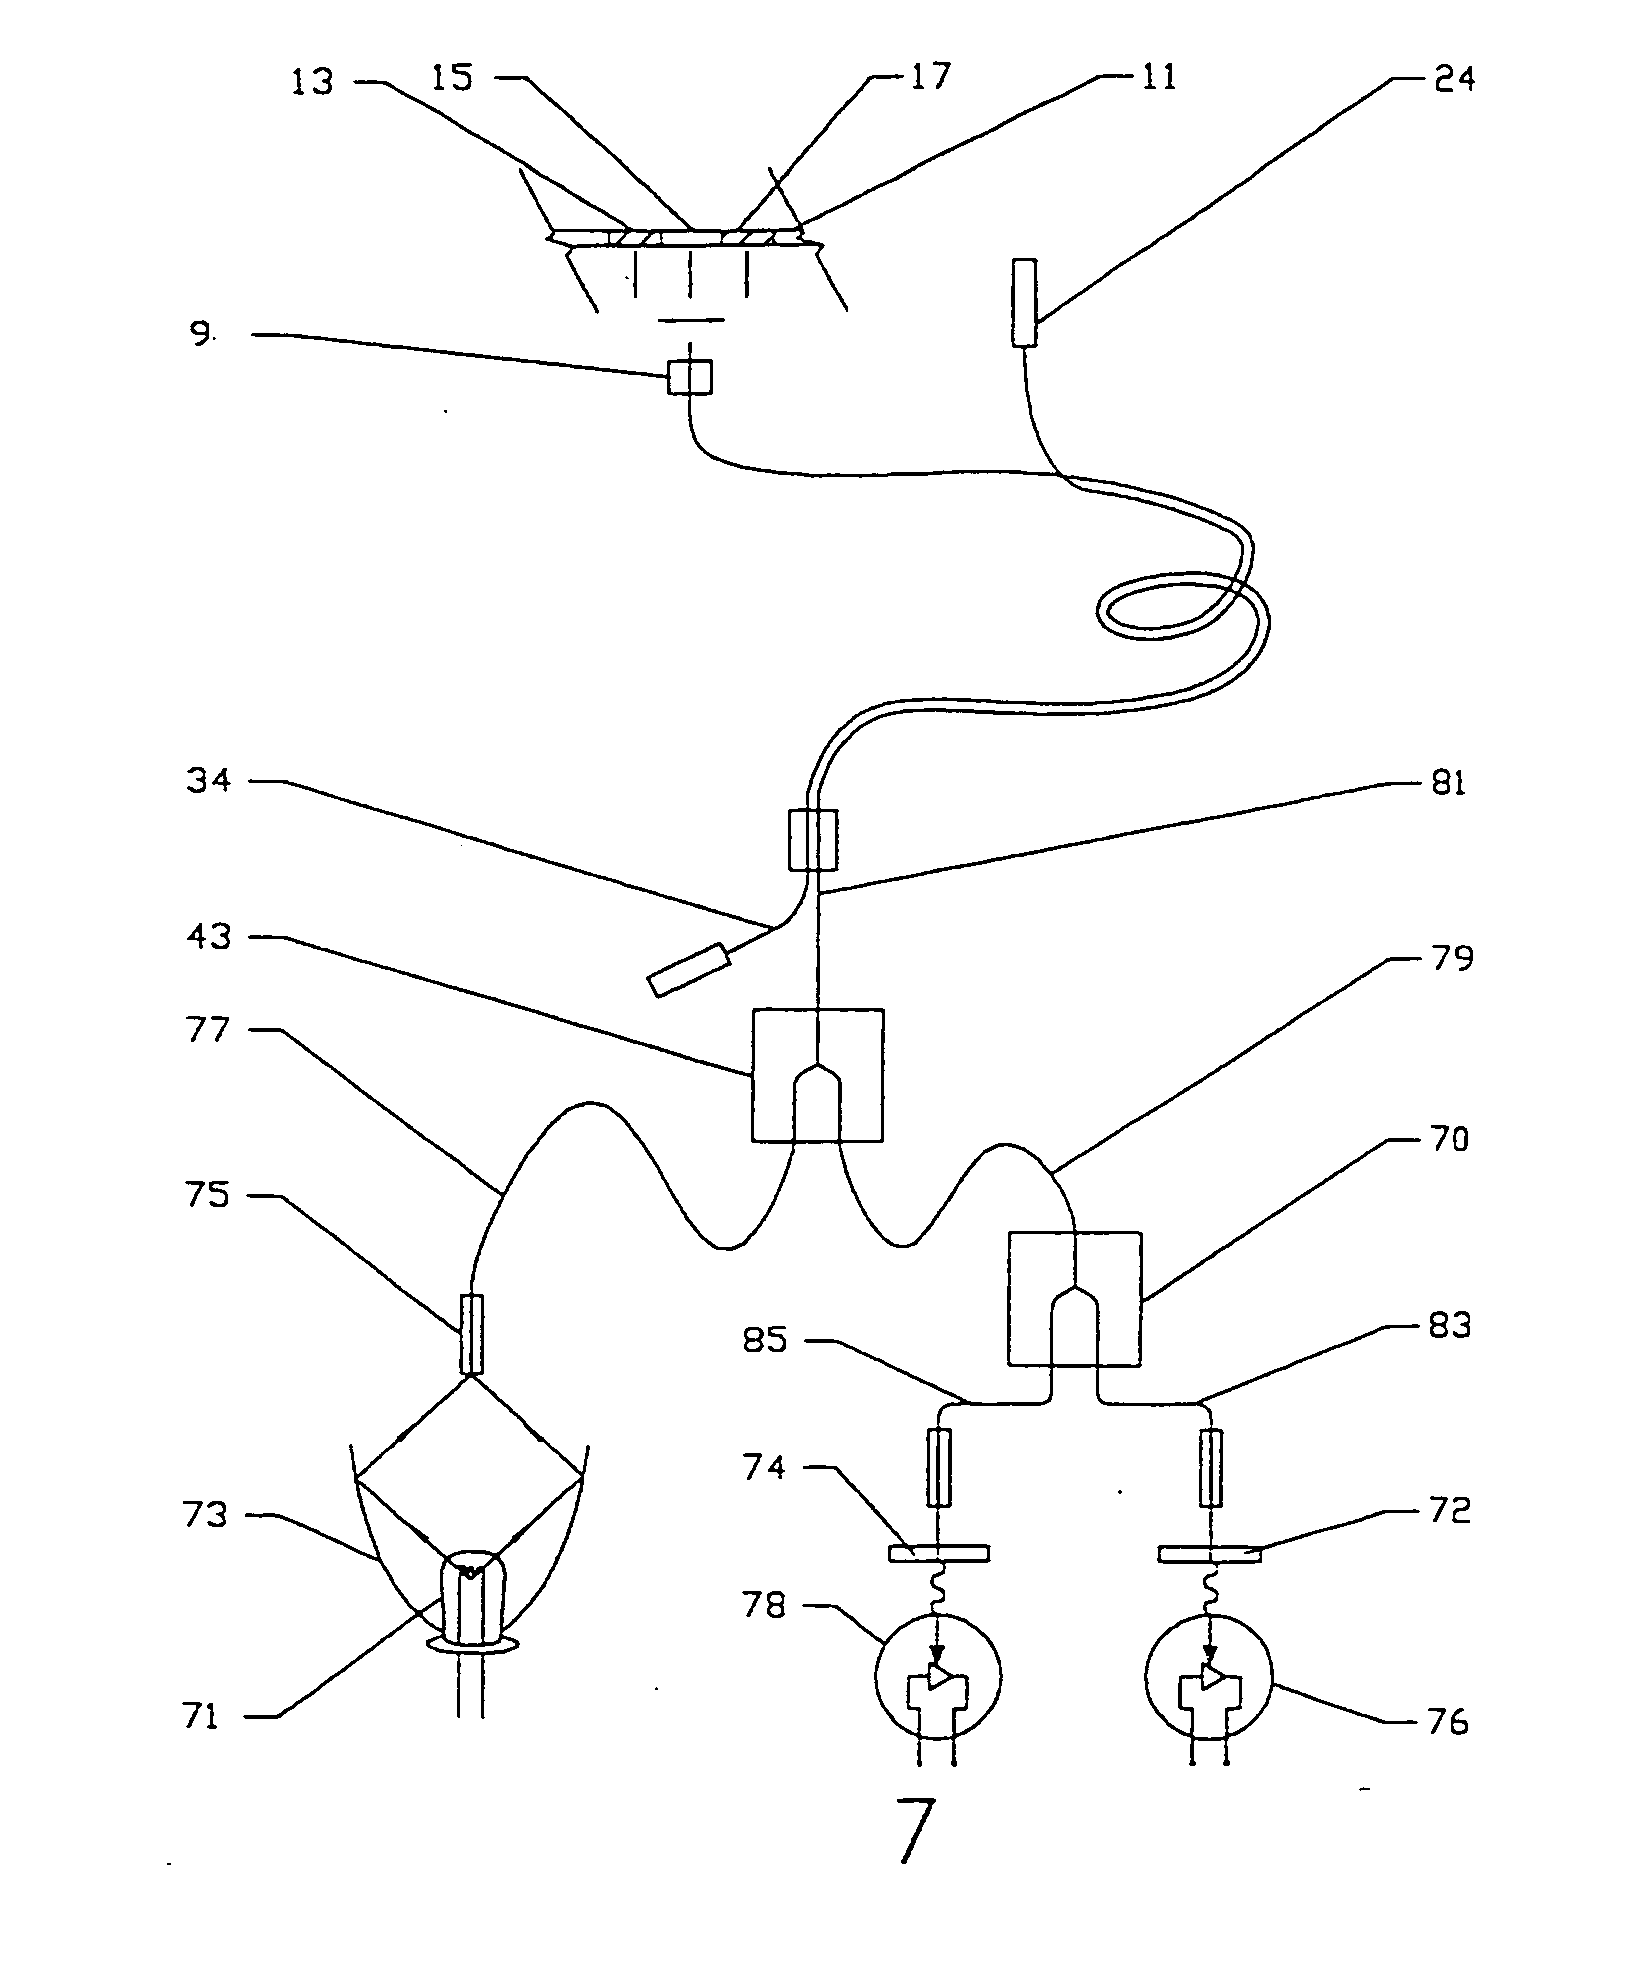 Apparatus and methods relating to fluorescent optical switches